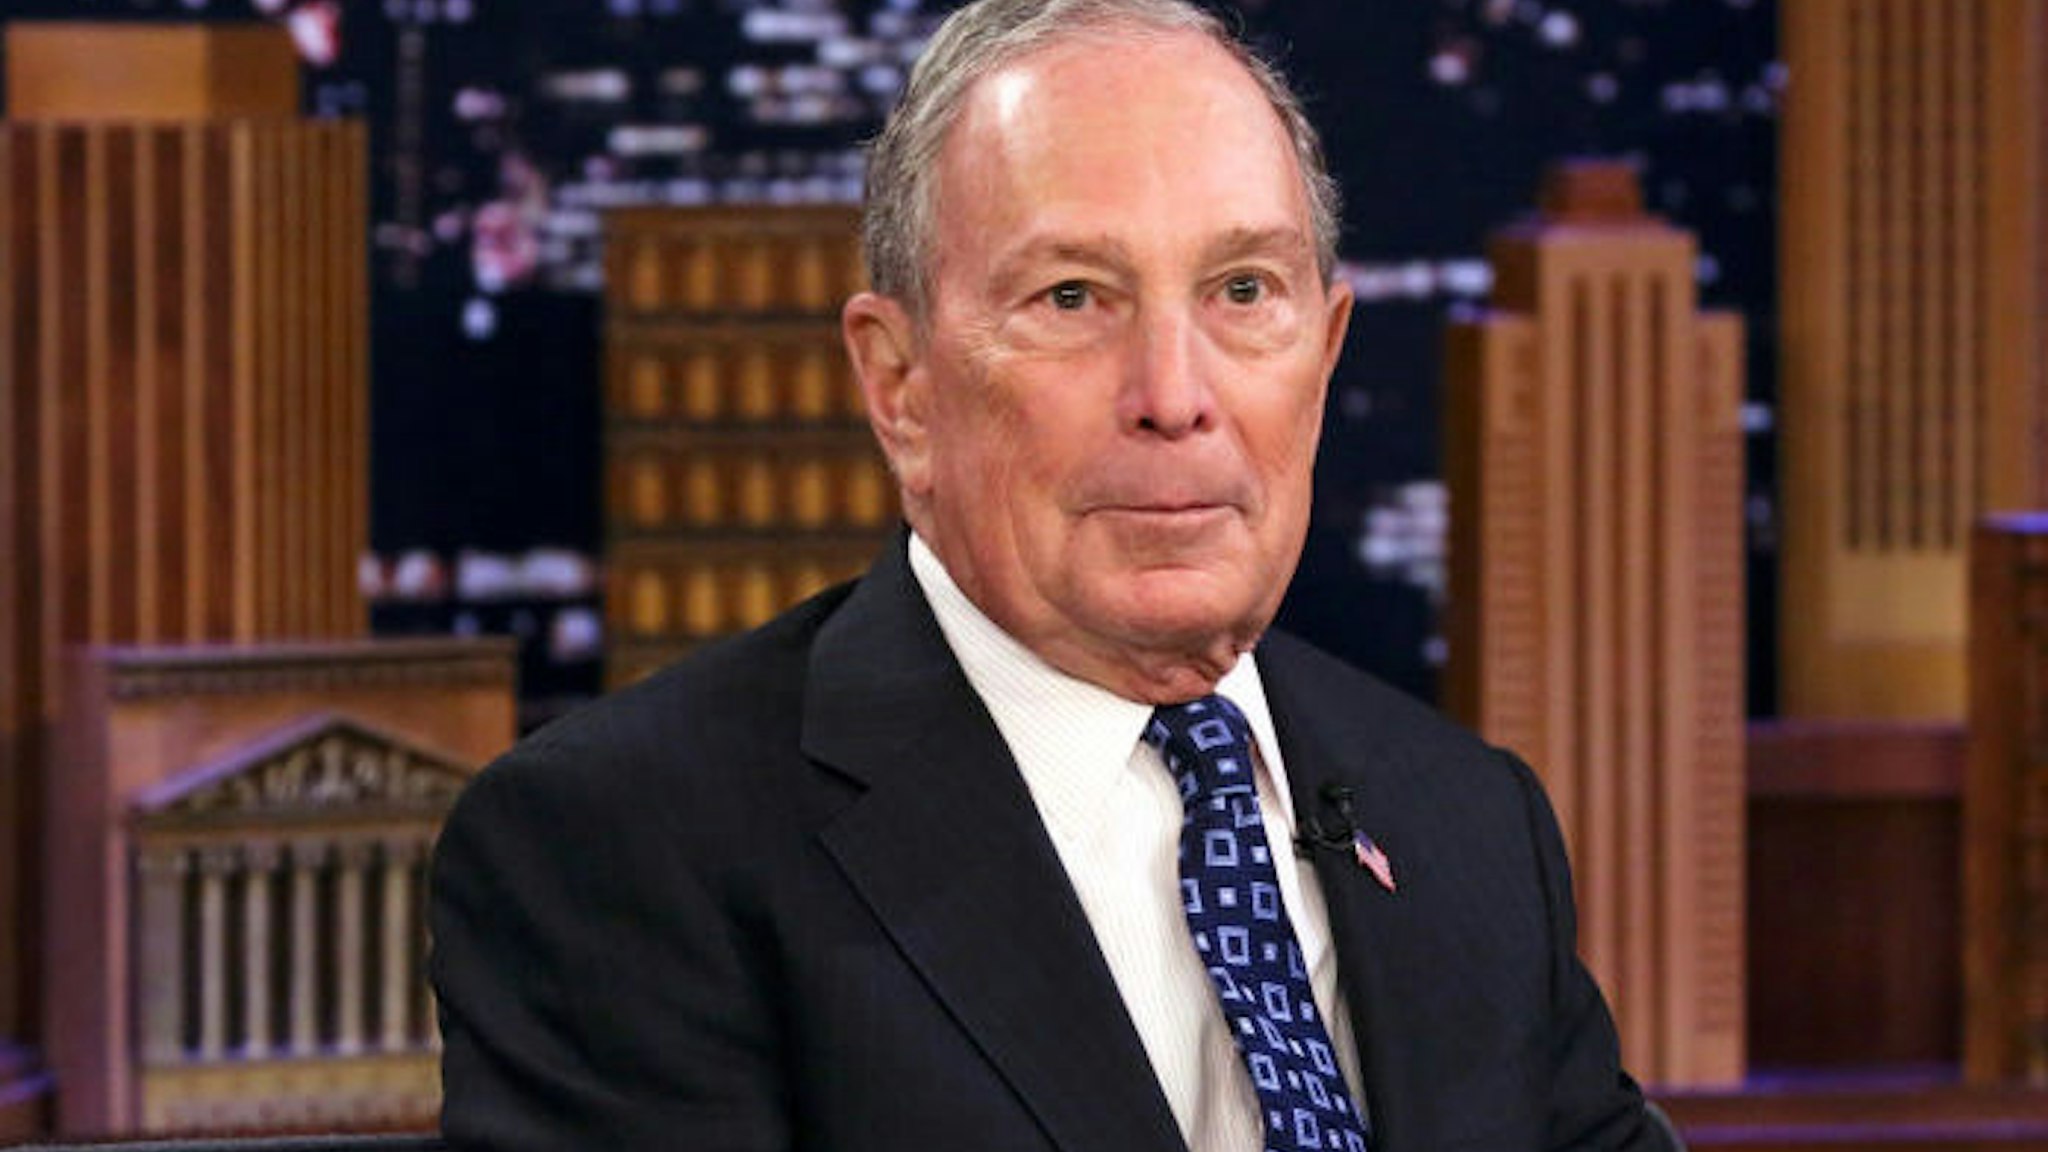 THE TONIGHT SHOW STARRING JIMMY FALLON -- Episode 1197 -- Pictured: Presidential candidate Michael Bloomberg during an interview on January 28, 2020 --